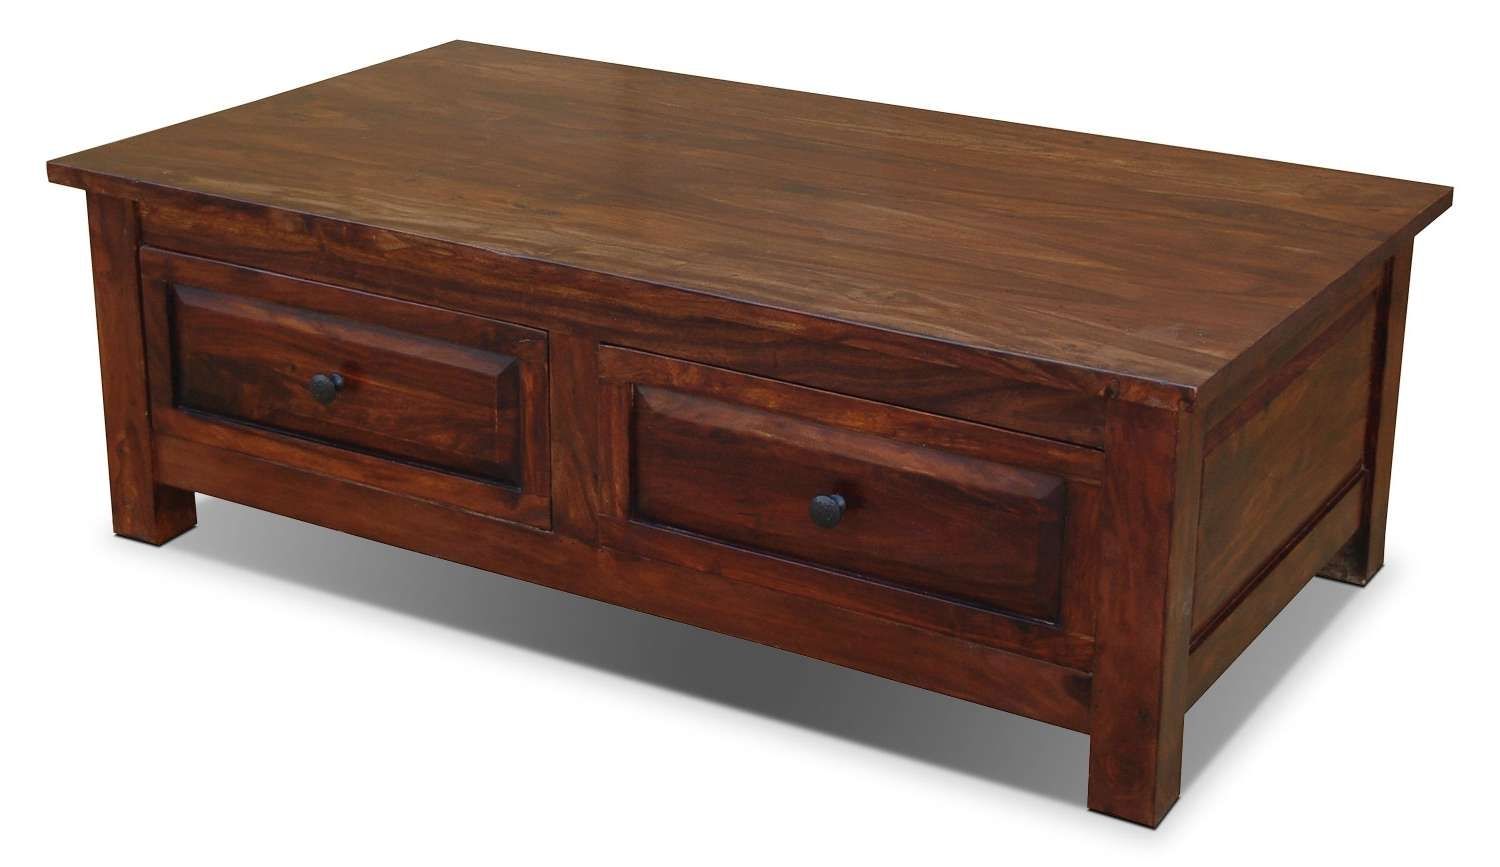 Most Popular Solid Wood Coffee Tables Regarding Solid Wood Coffee Table With Storage (View 13 of 20)